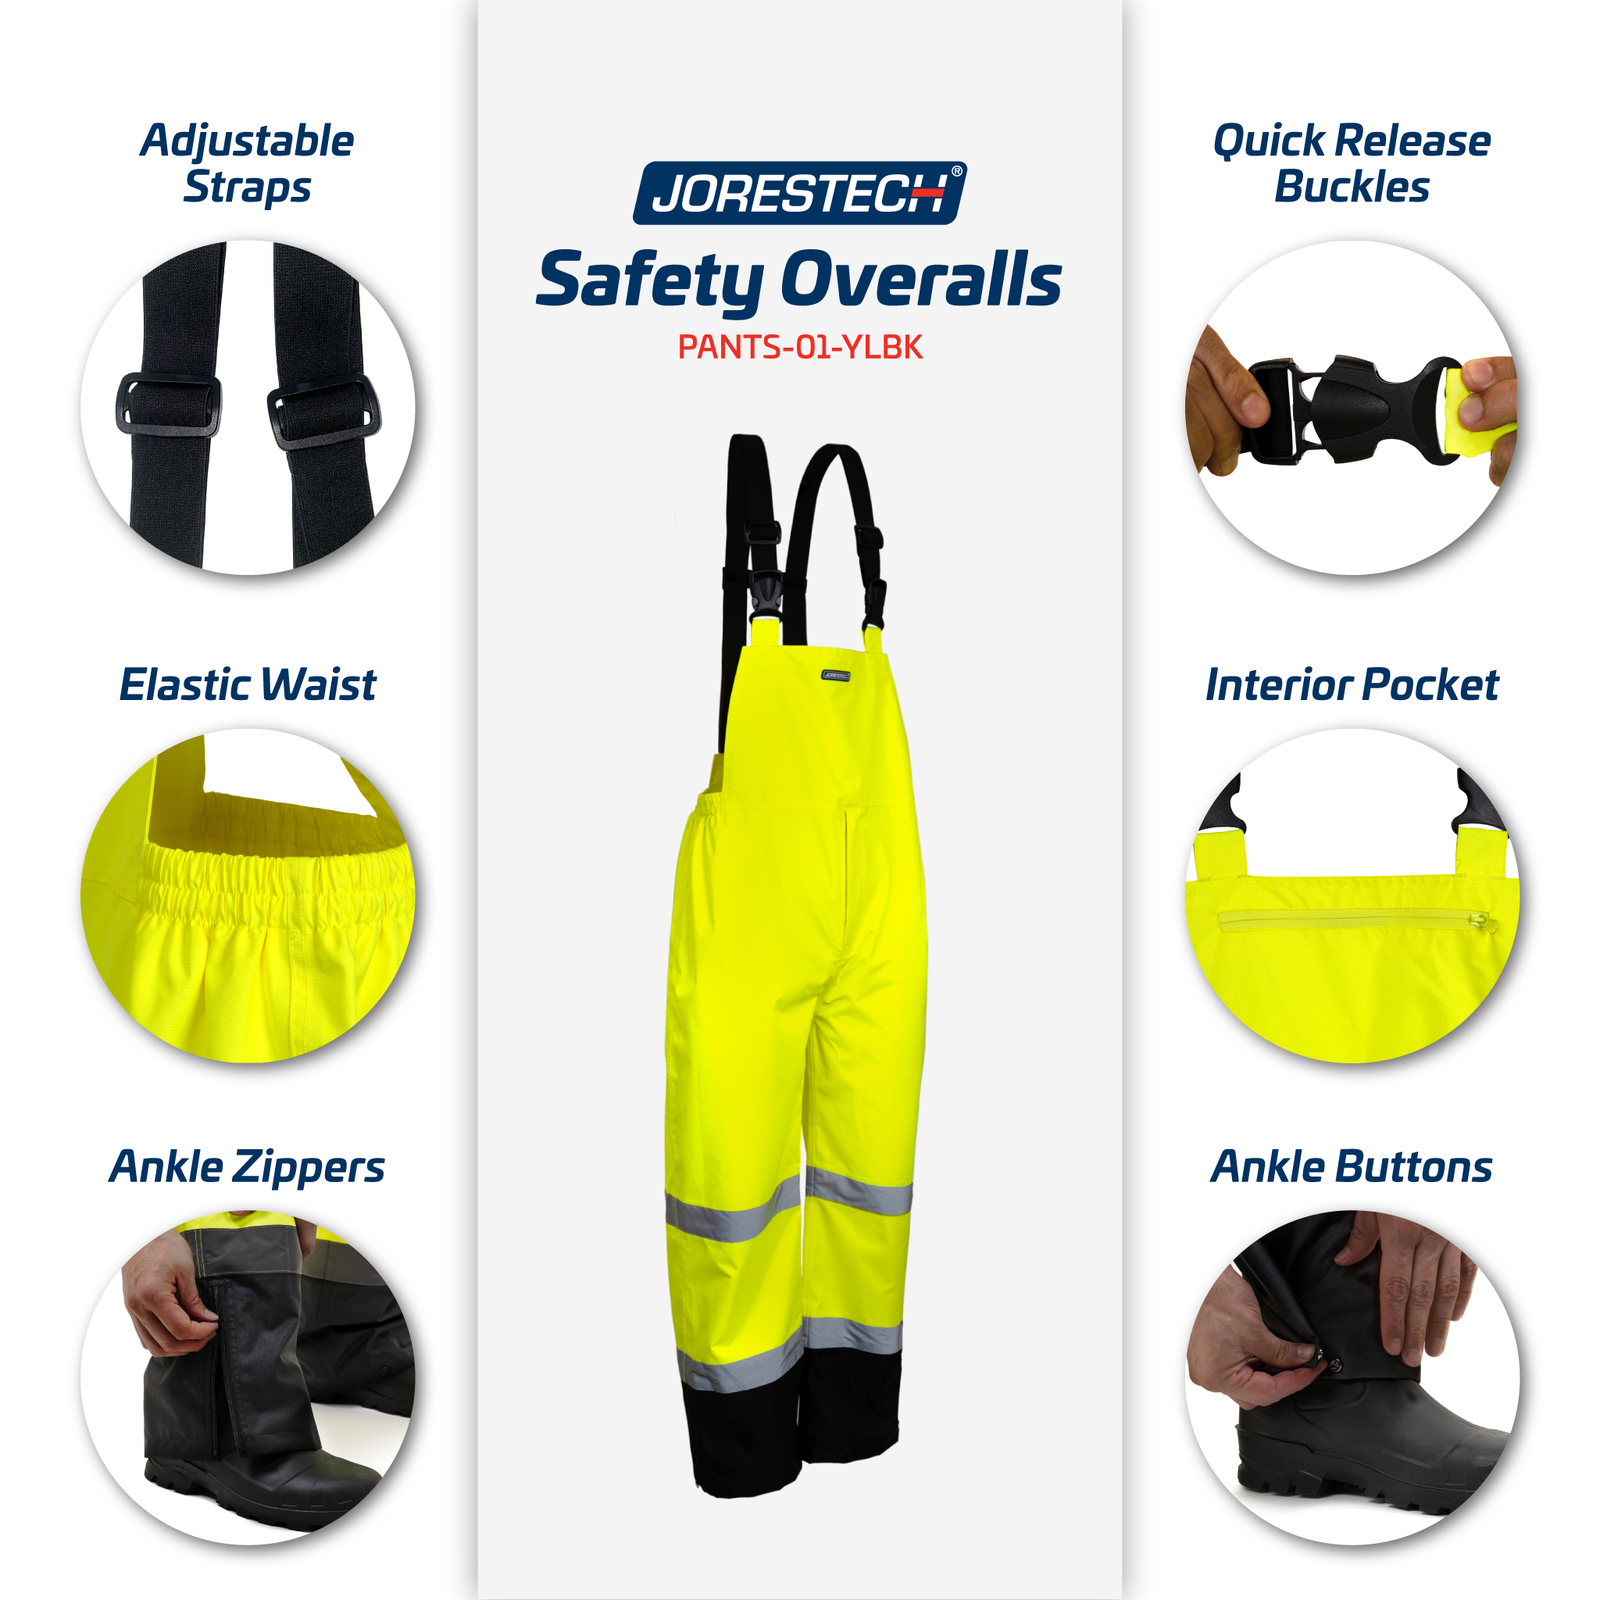 High visibility safety overall pants with reflective stripes and adjustable straps.